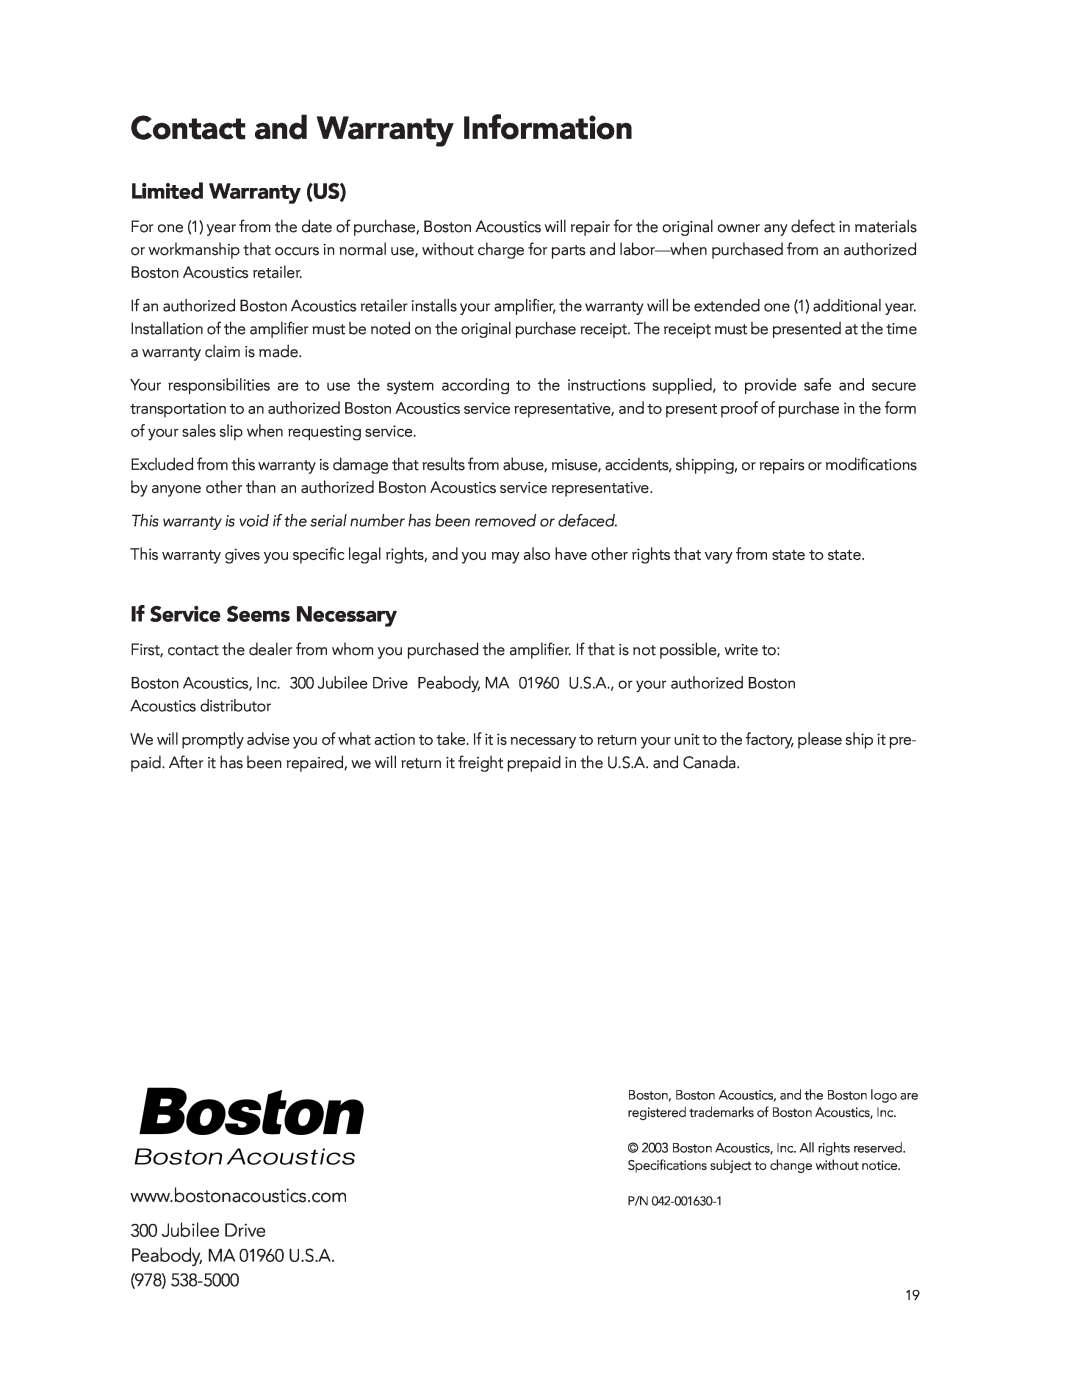 Boston Acoustics GT-424-Channel manual Contact and Warranty Information, Limited Warranty US, If Service Seems Necessary 